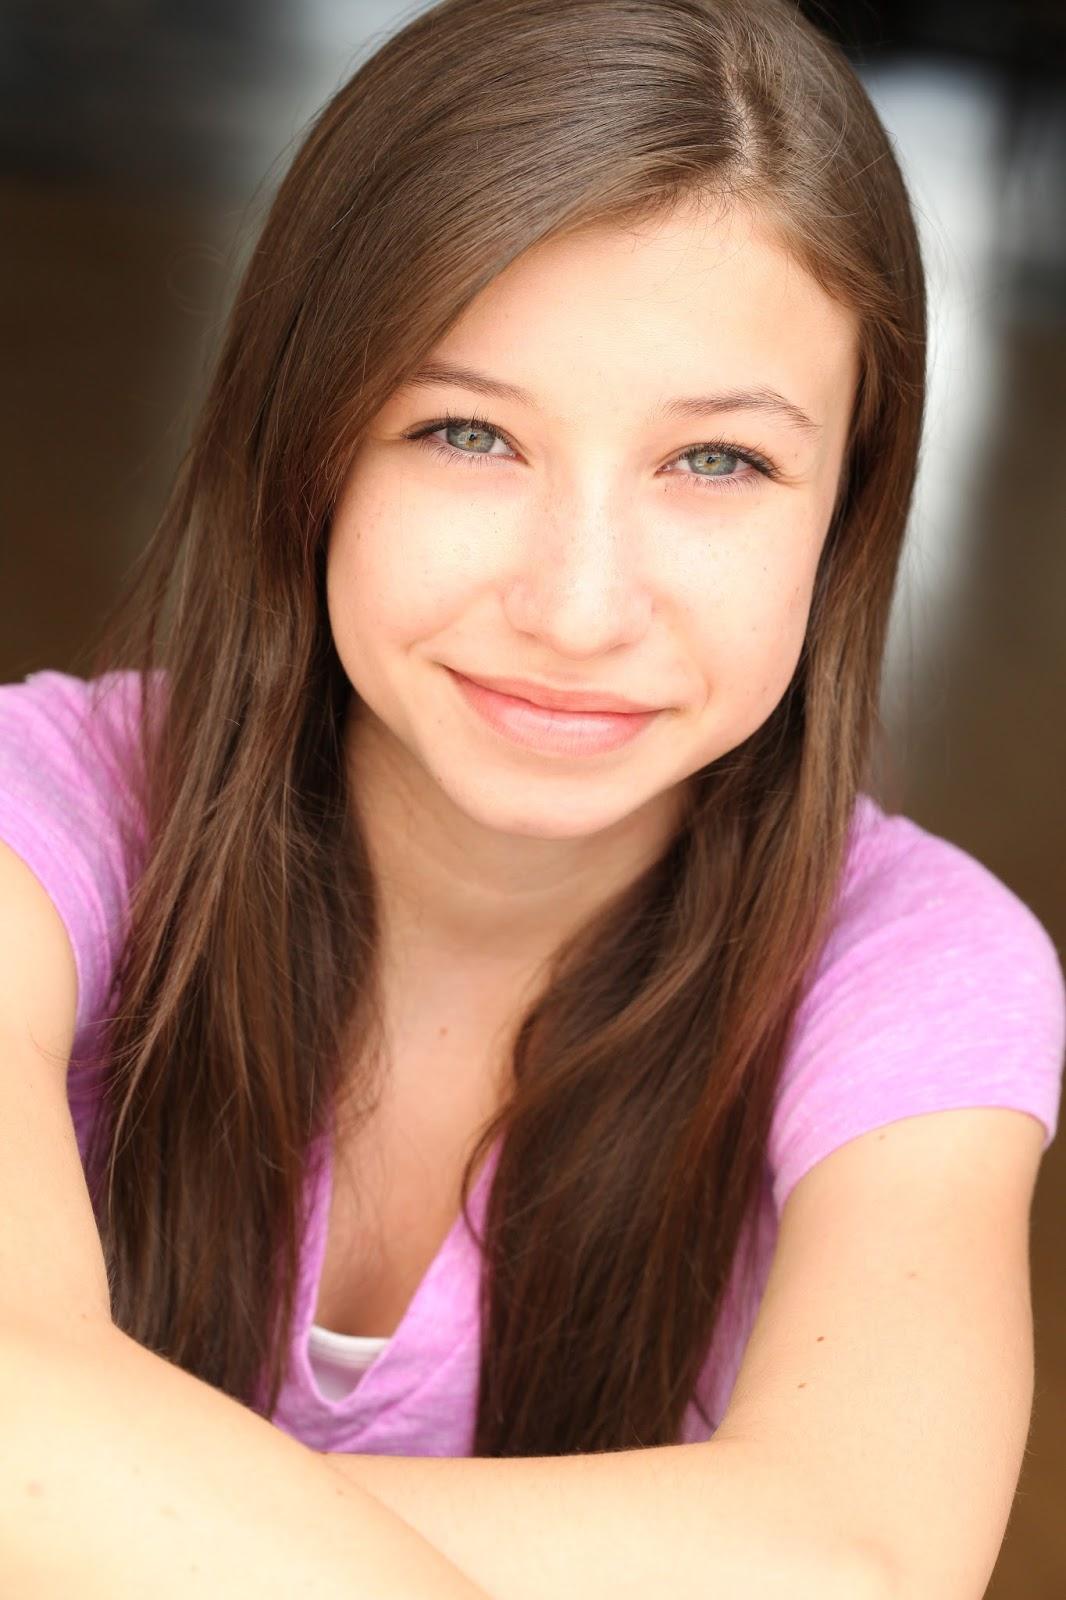 70+ Hot Pictures Of Katelyn Nacon Which Are Sure to Catch Your Attention 36